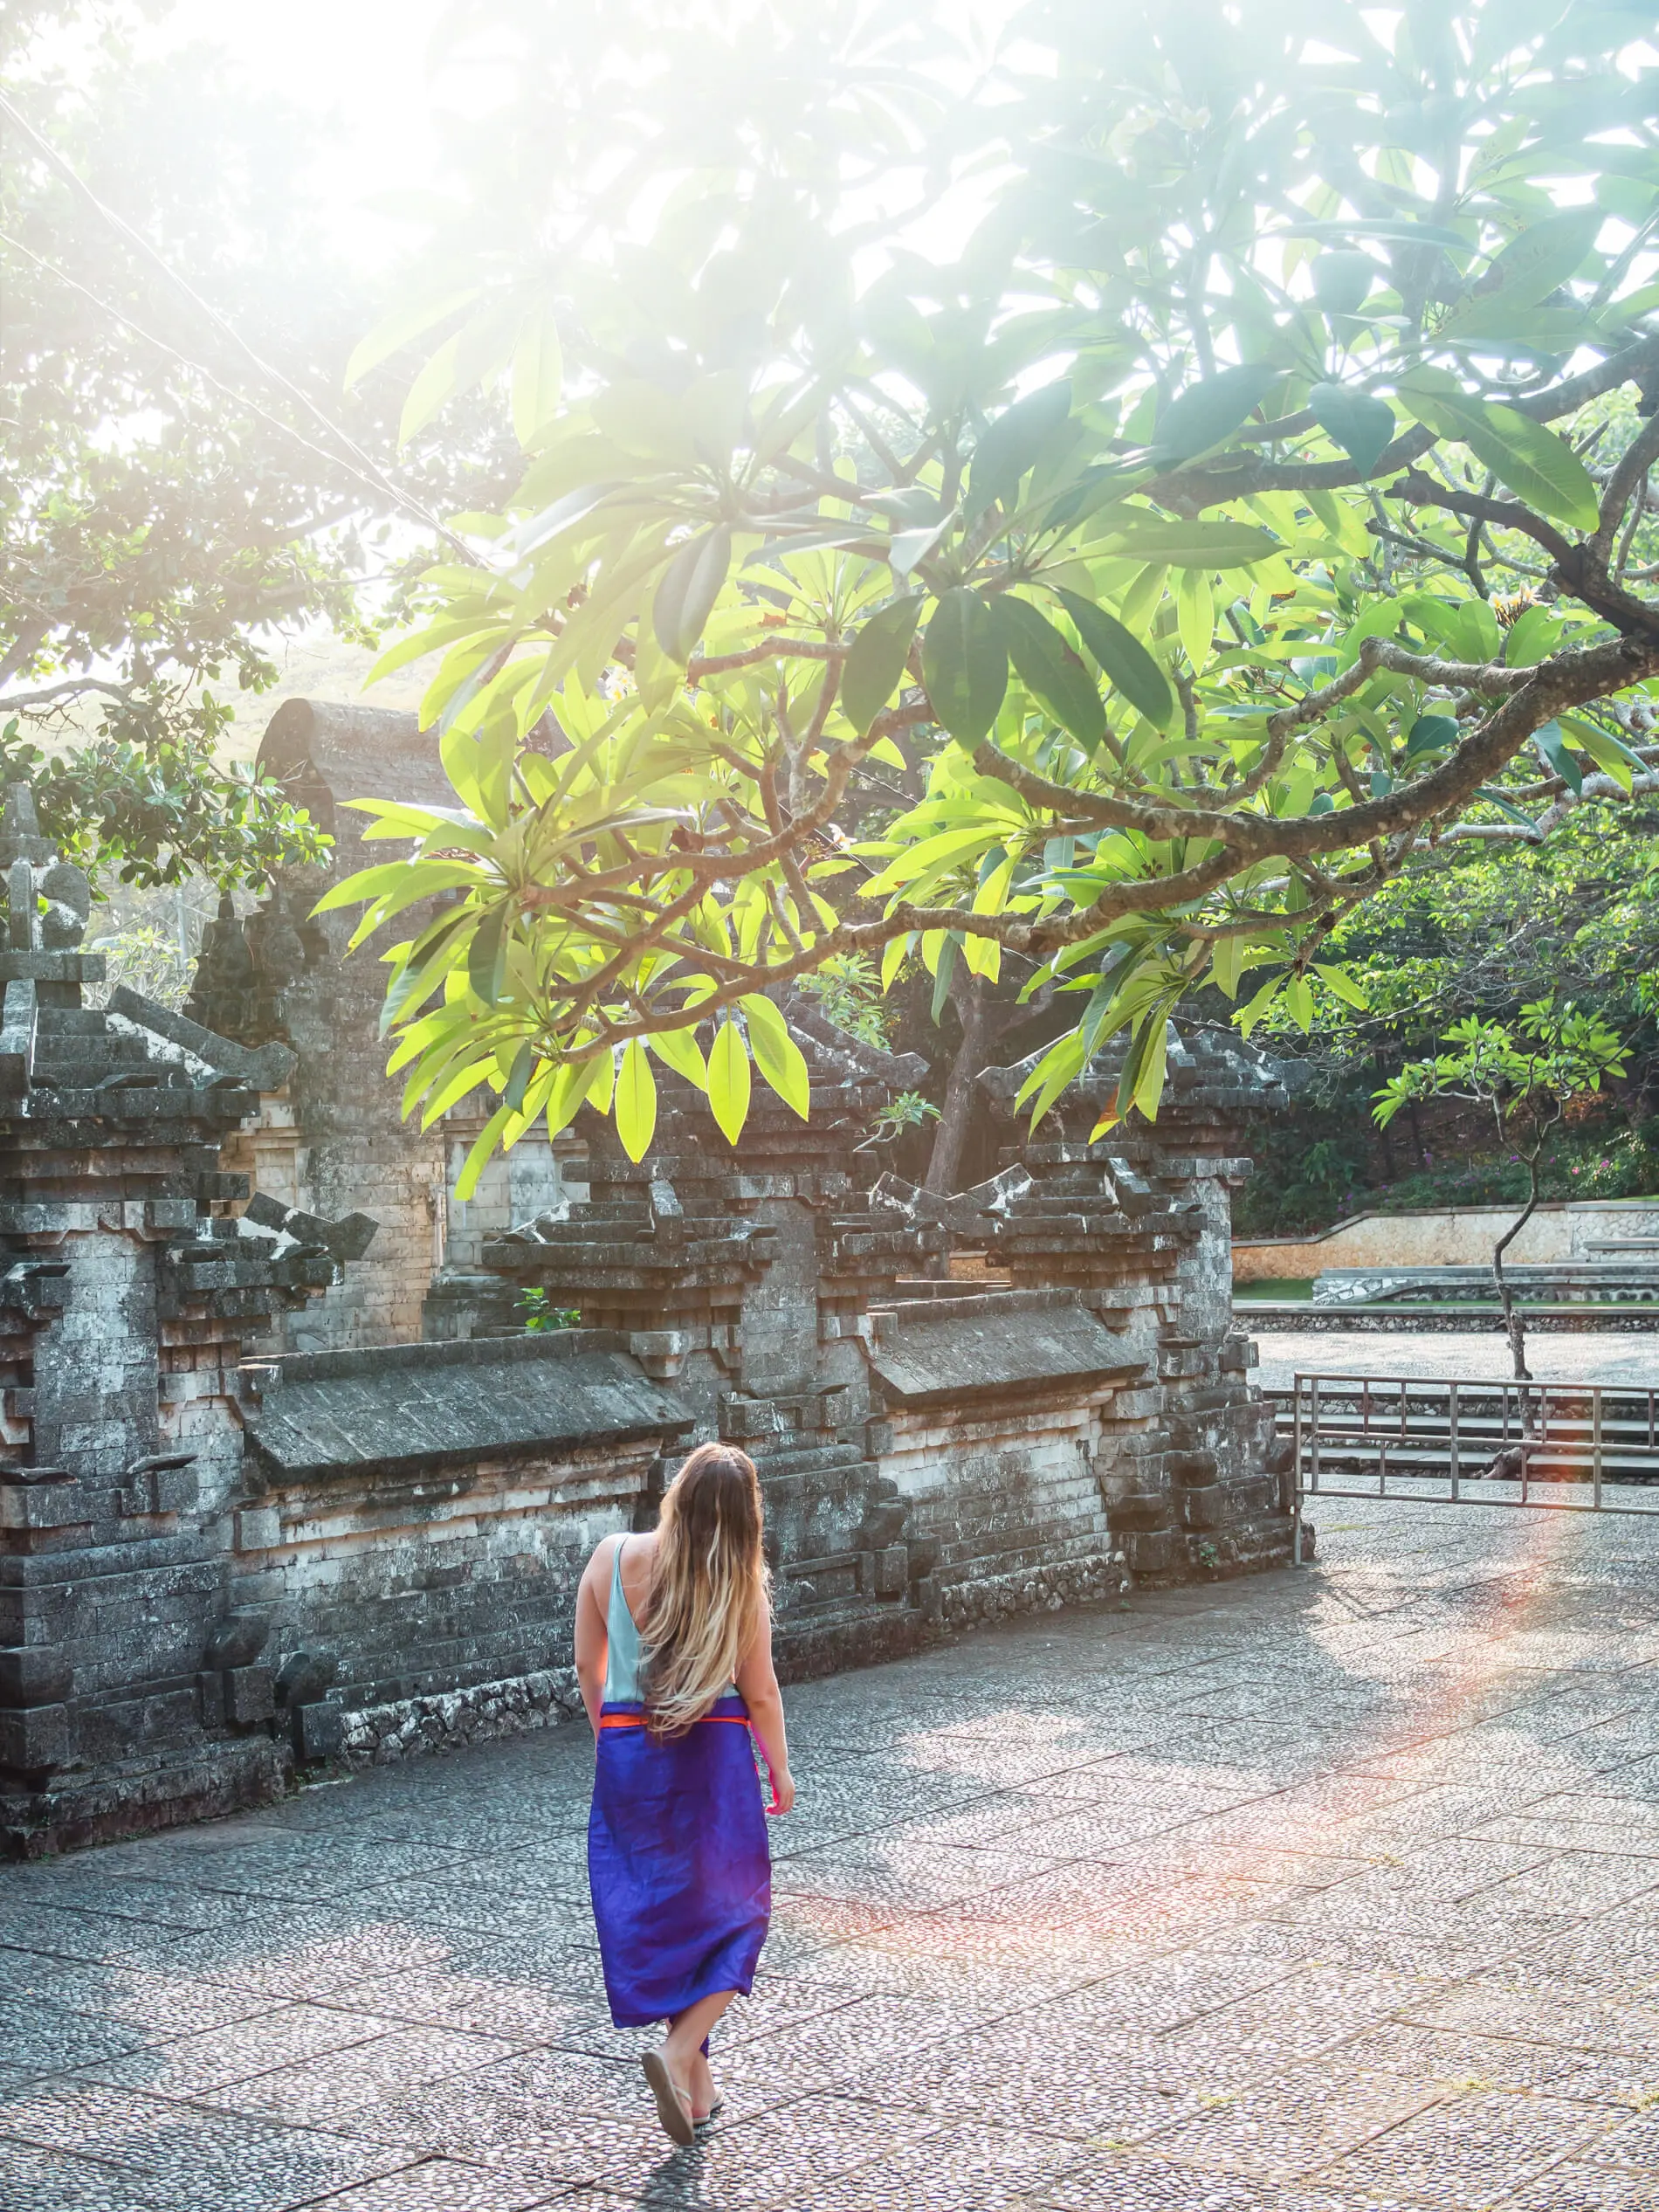 Girl with long hair walking along an ancient ornate shrine in white and grey stone under a tree with sun shining in at Uluwatu Temple in Bali.